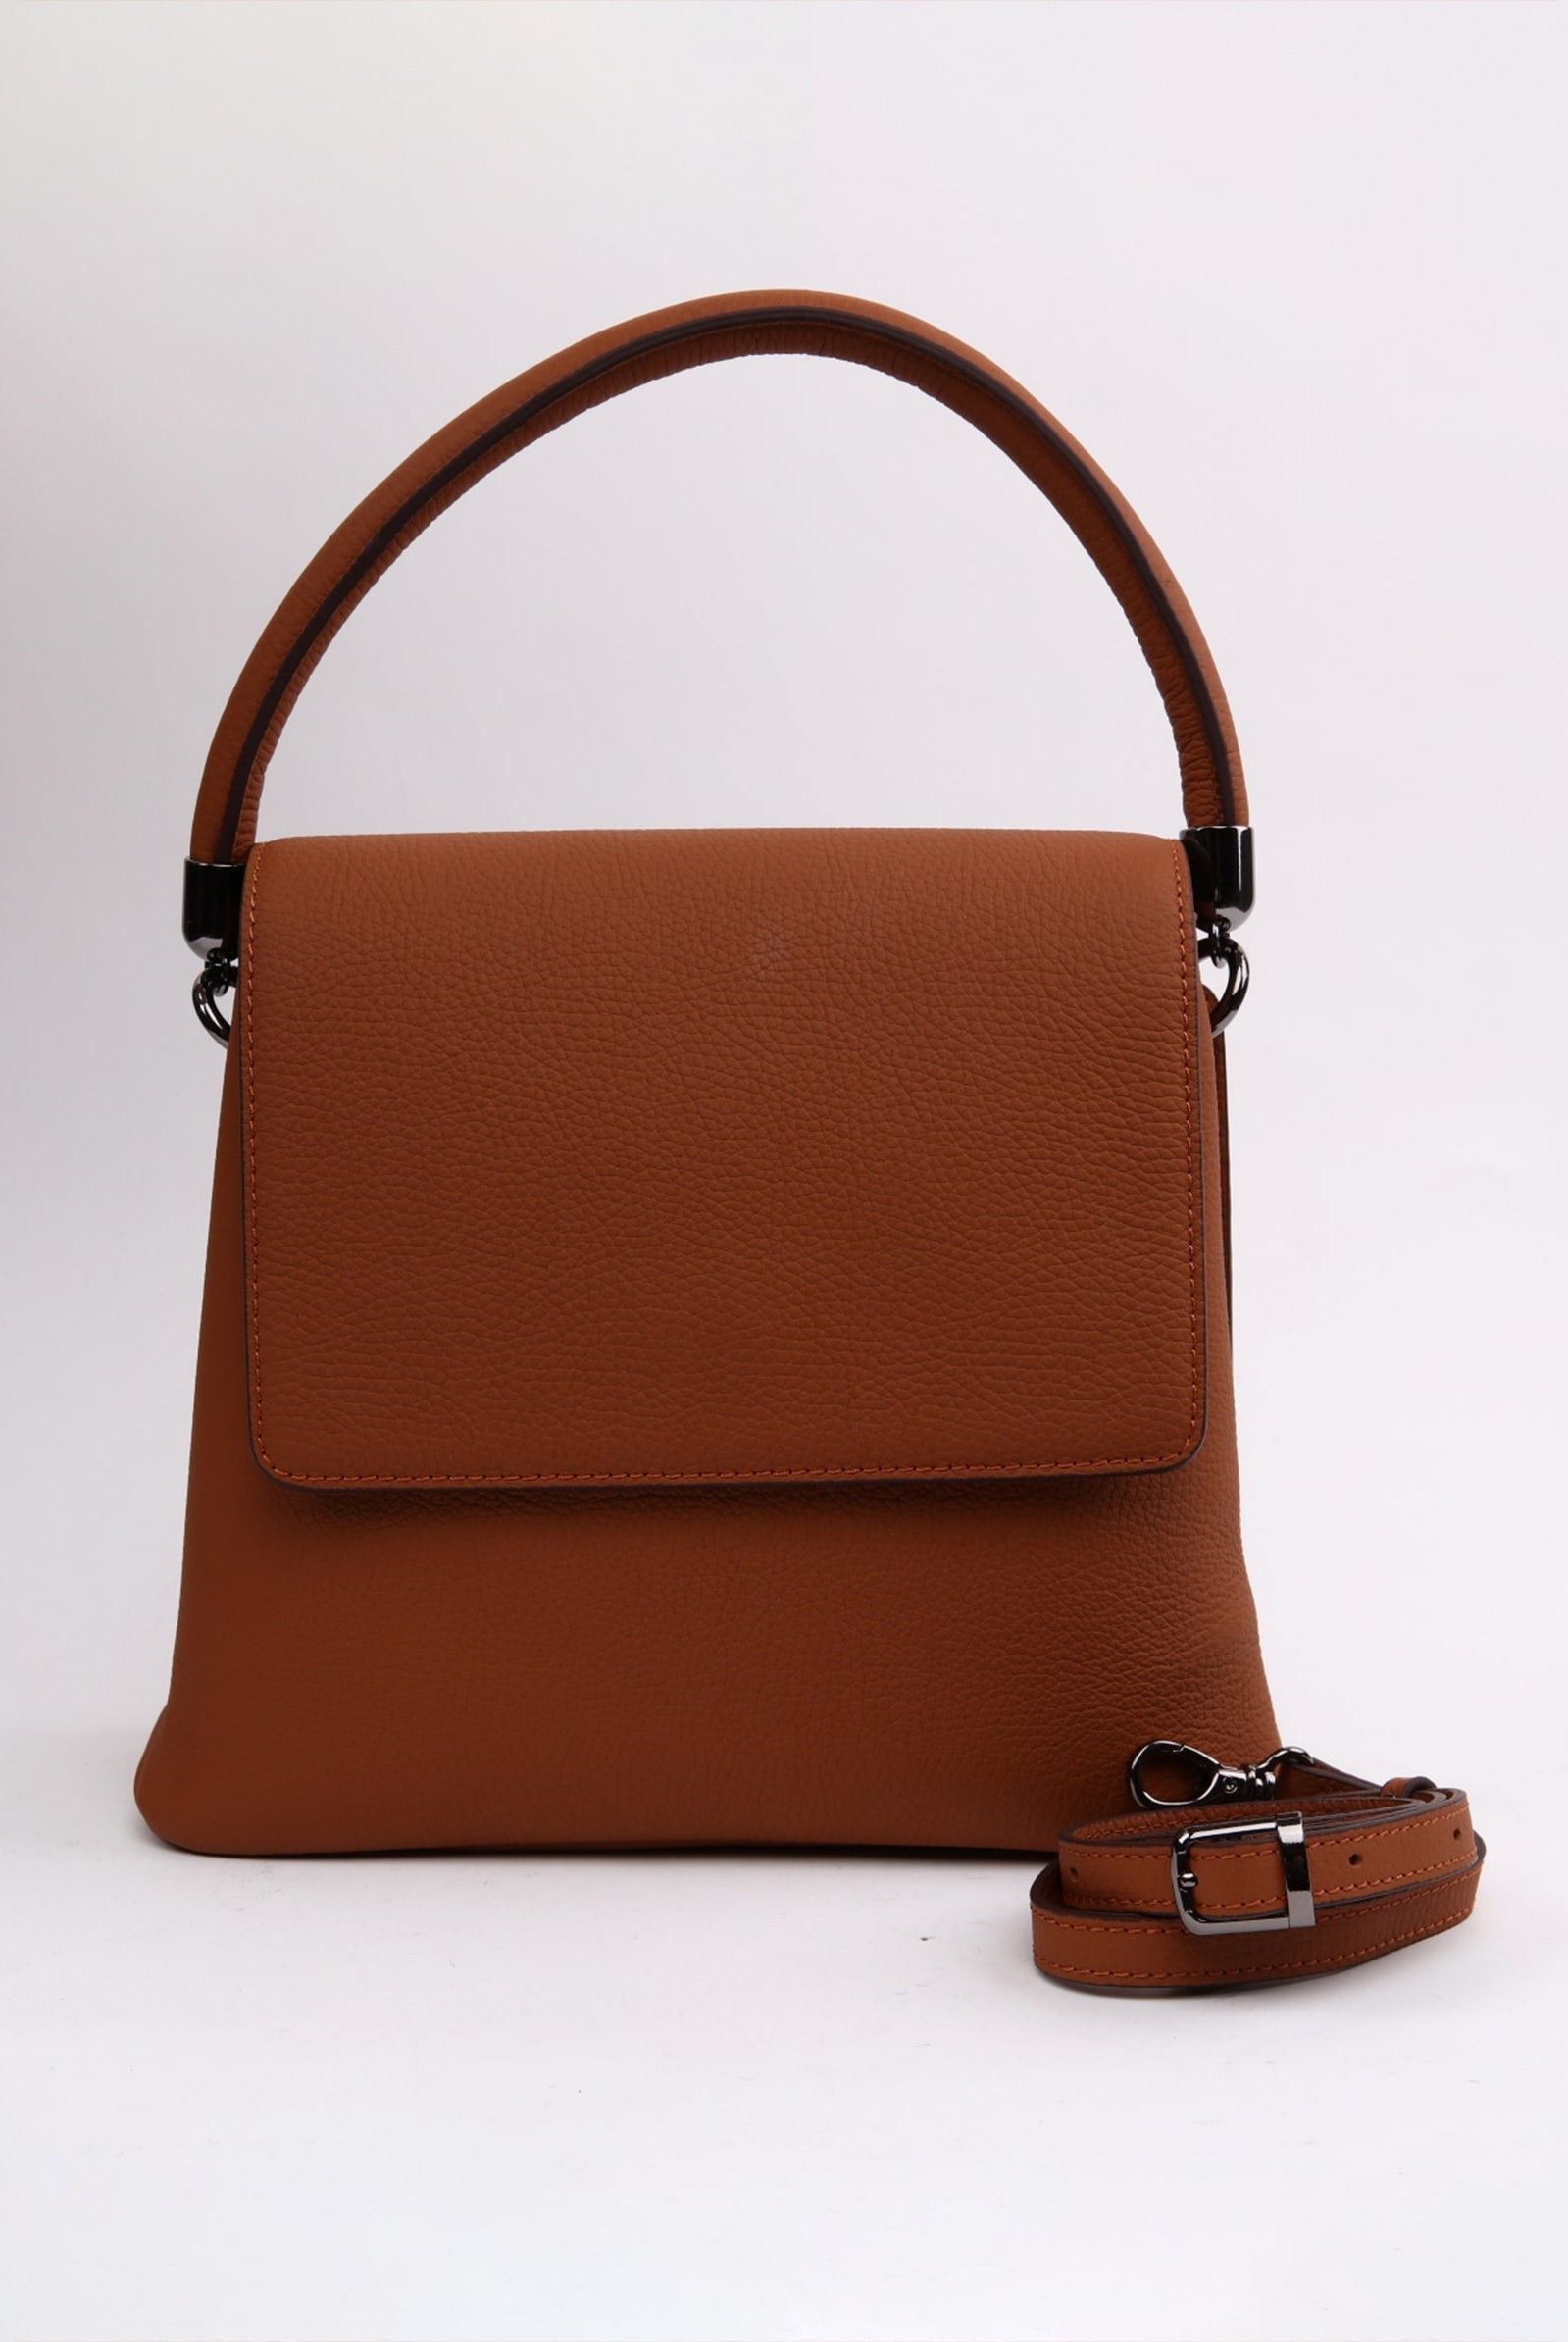 brown leather bag womens